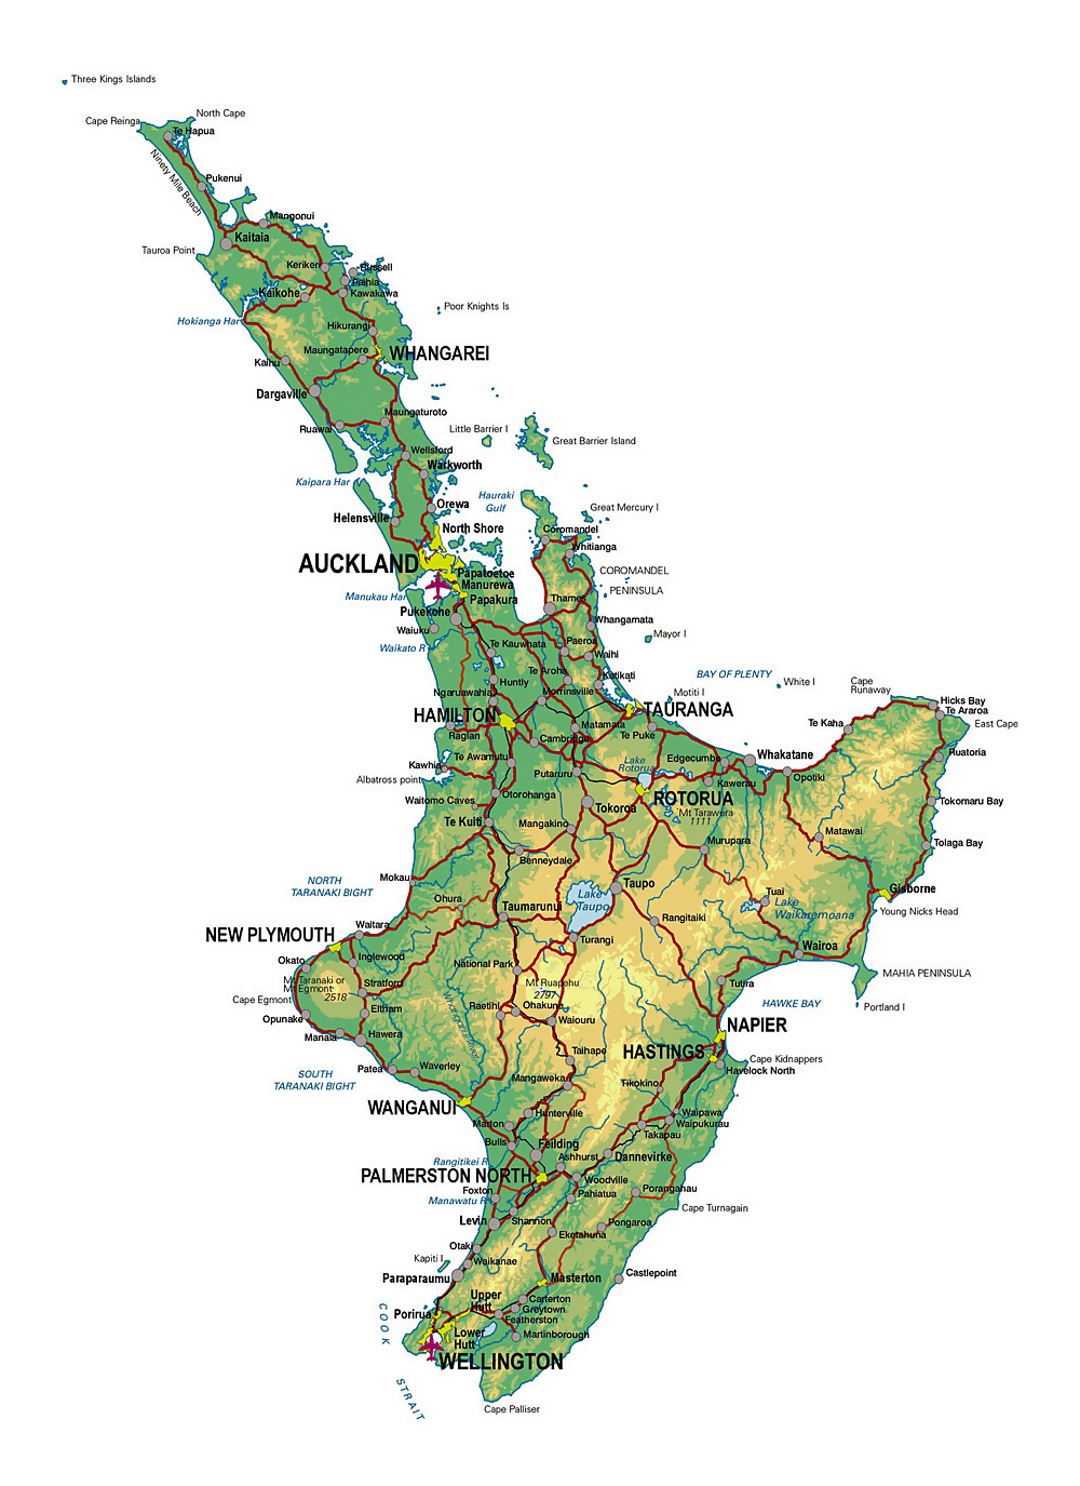 Detailed map of North Island, New Zealand with other marks